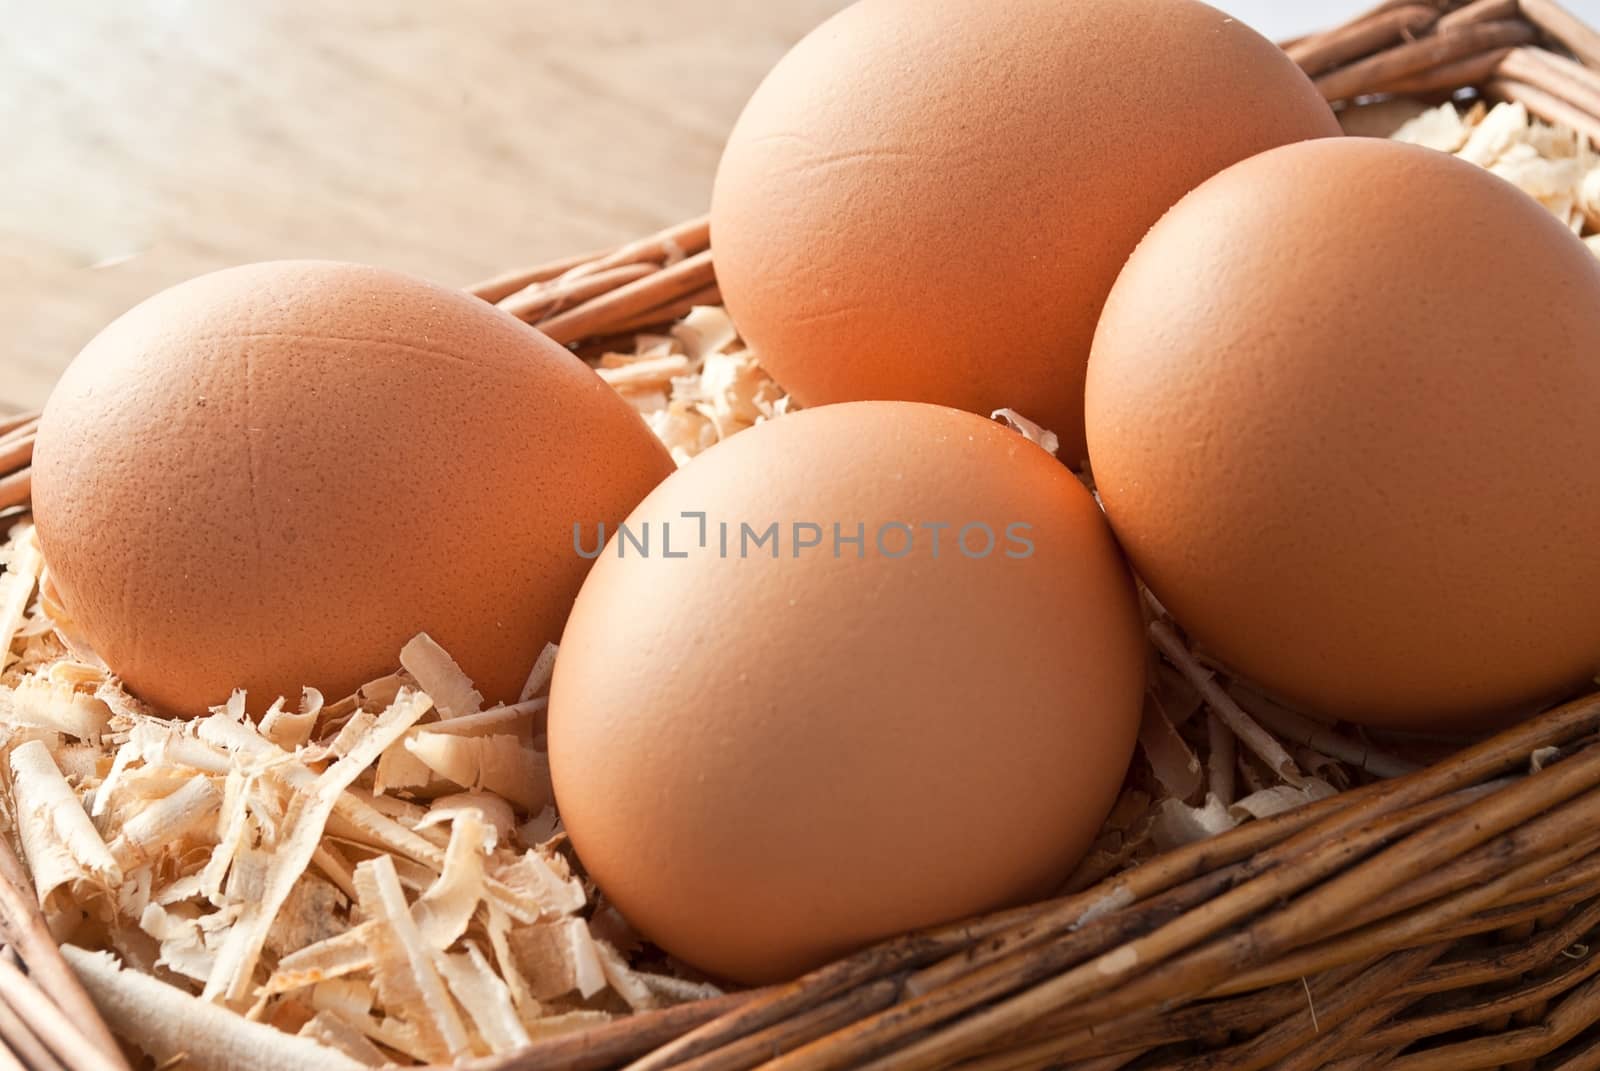 Egg on sawdust with old basket over on wooden background  by rakoptonLPN